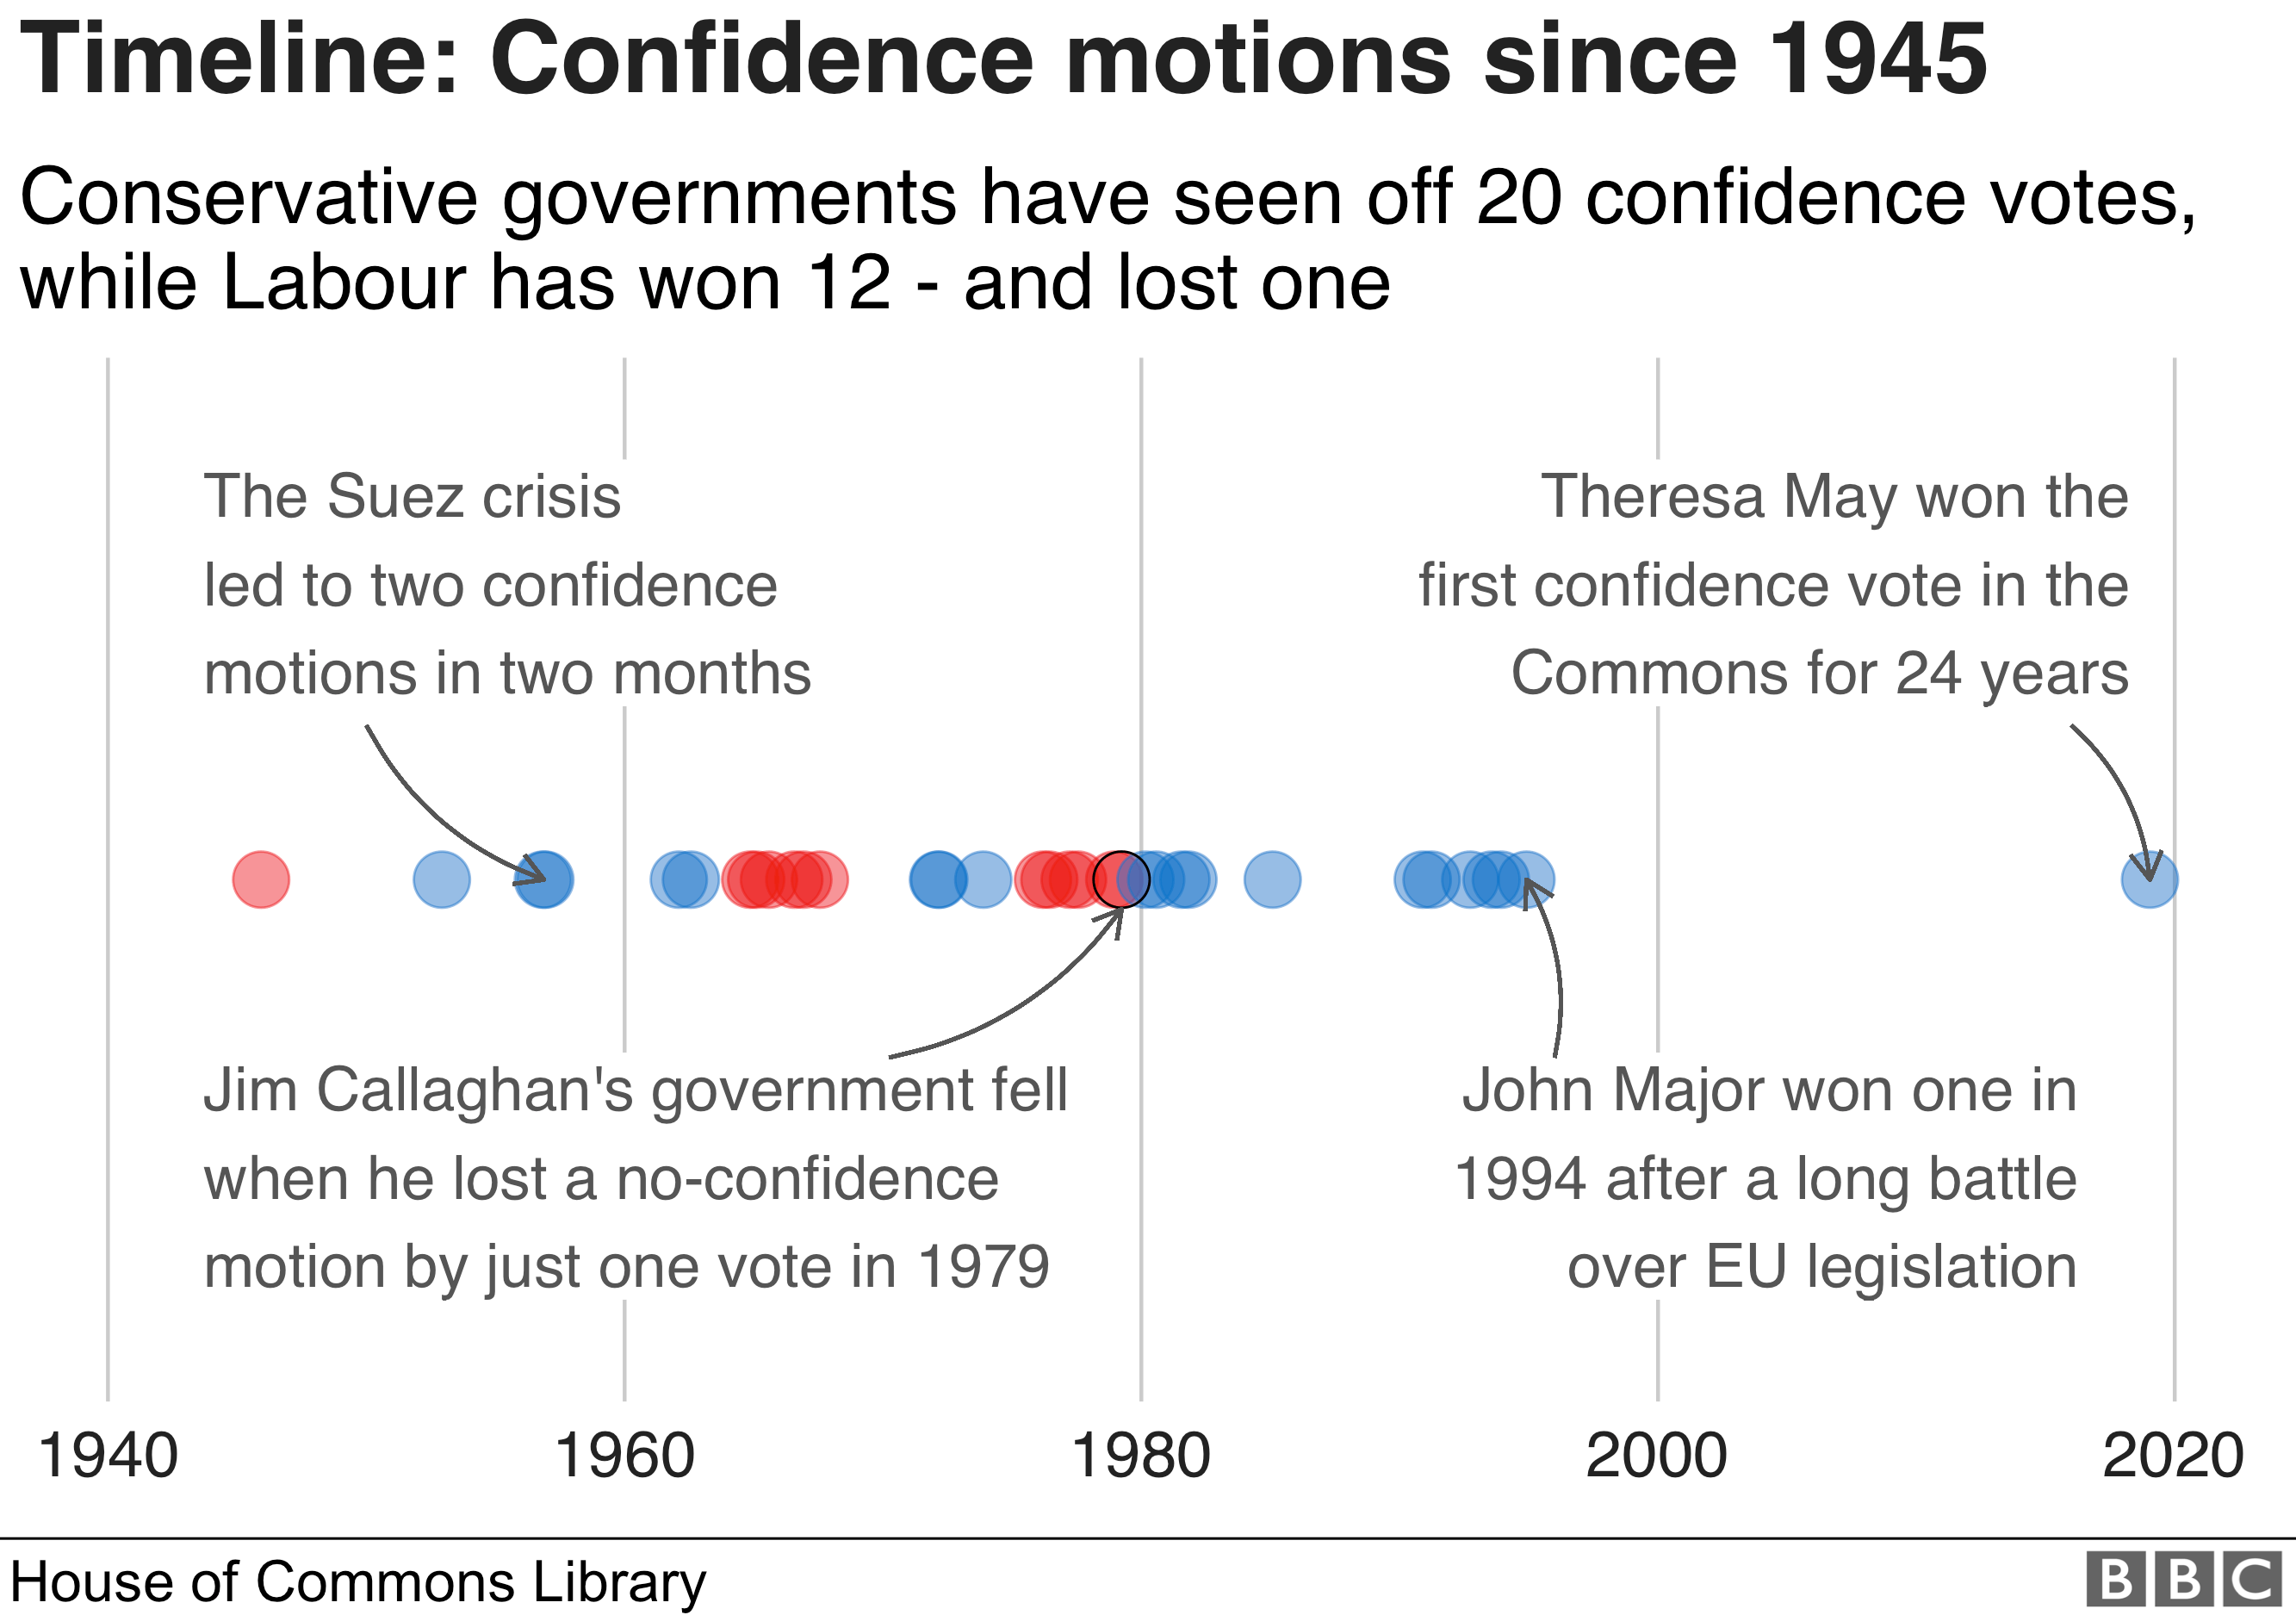 Timeline showing confidence motions since 1945